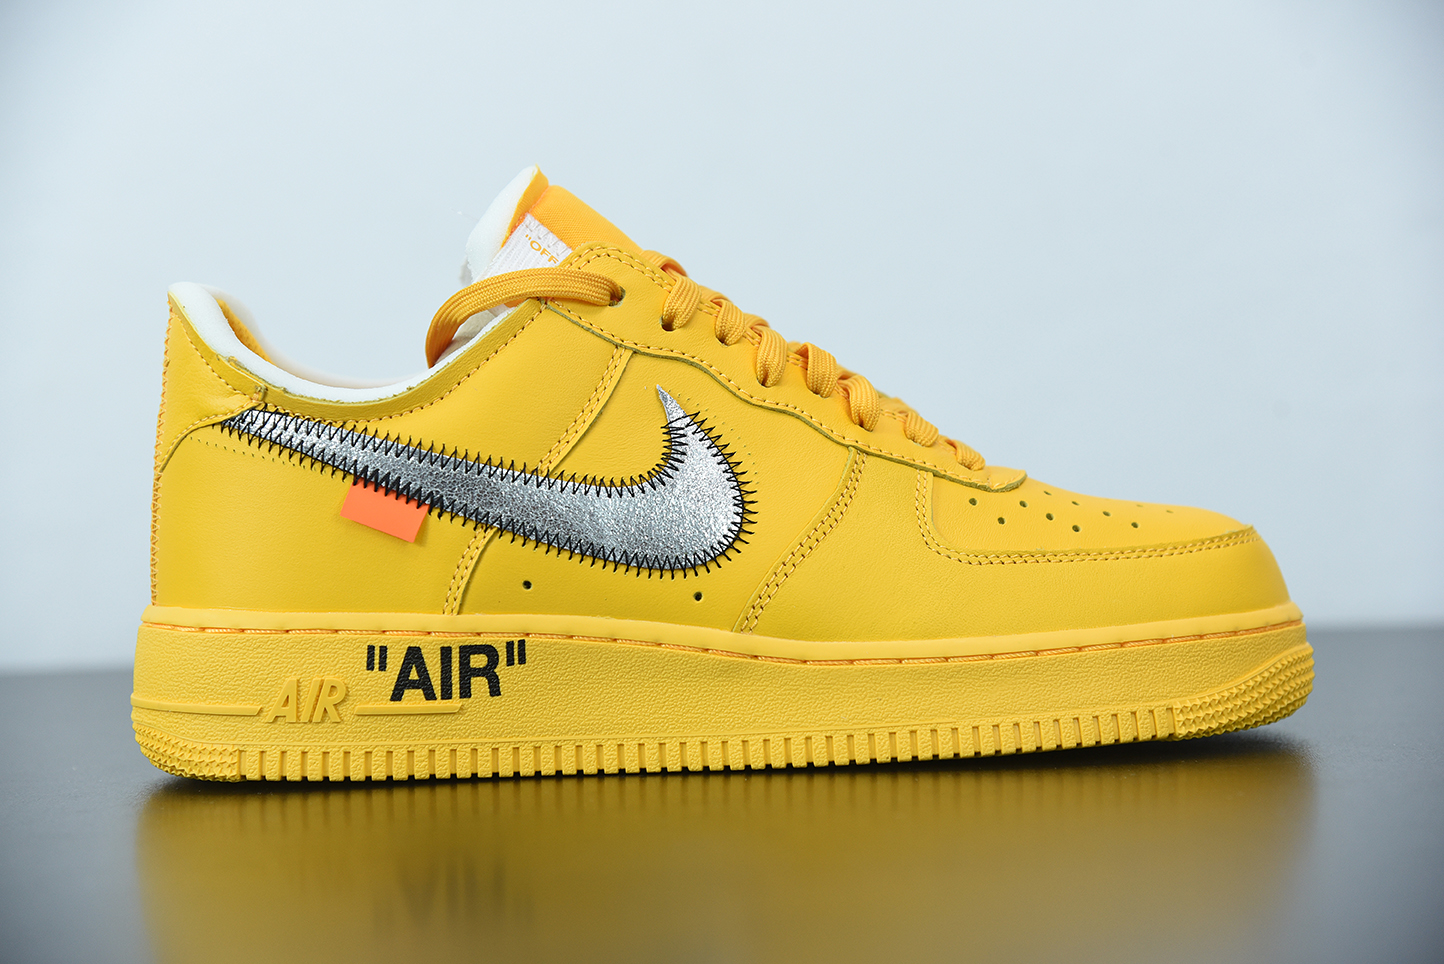 Off White Nike Air Force 1 University Gold Sneaker Unboxing 